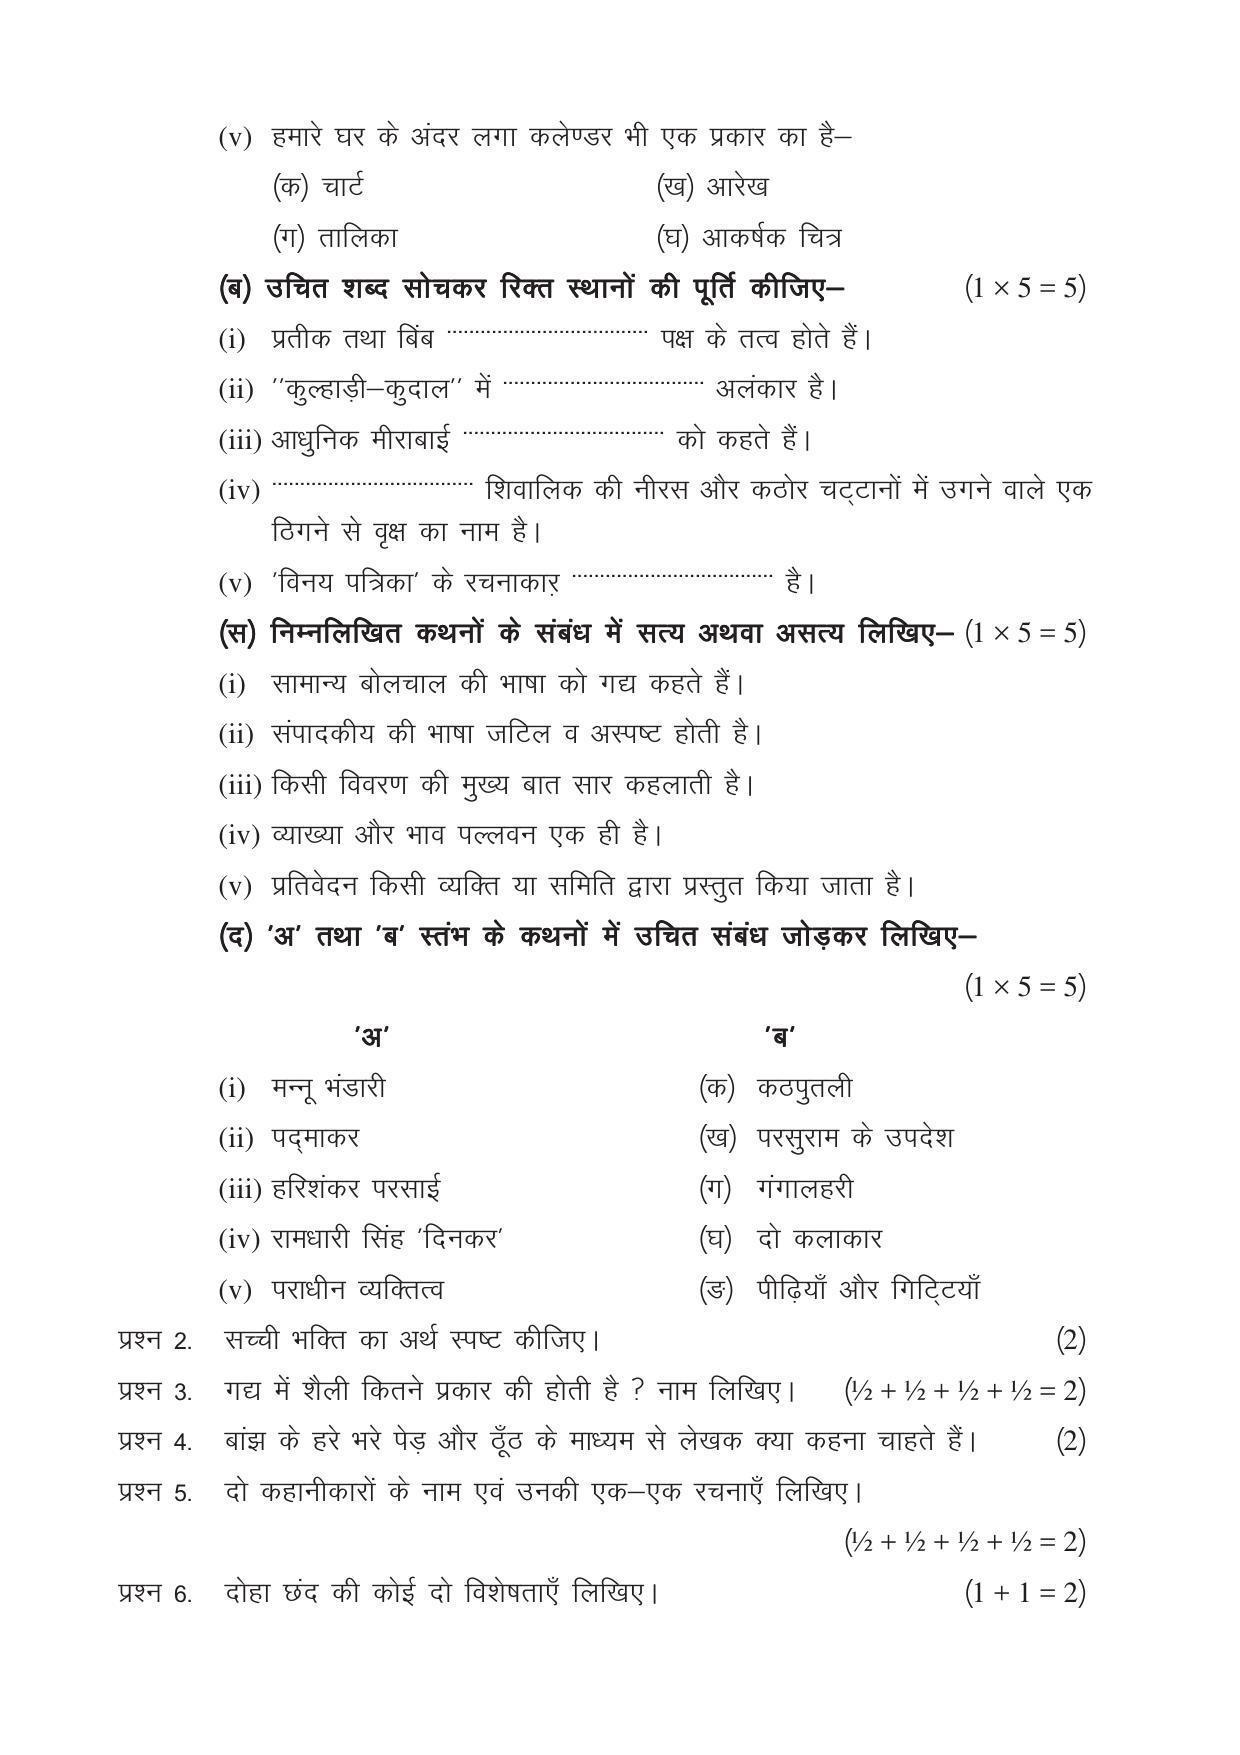 CGSOS Class 12 Model Question Paper - Hindi - II - Page 2